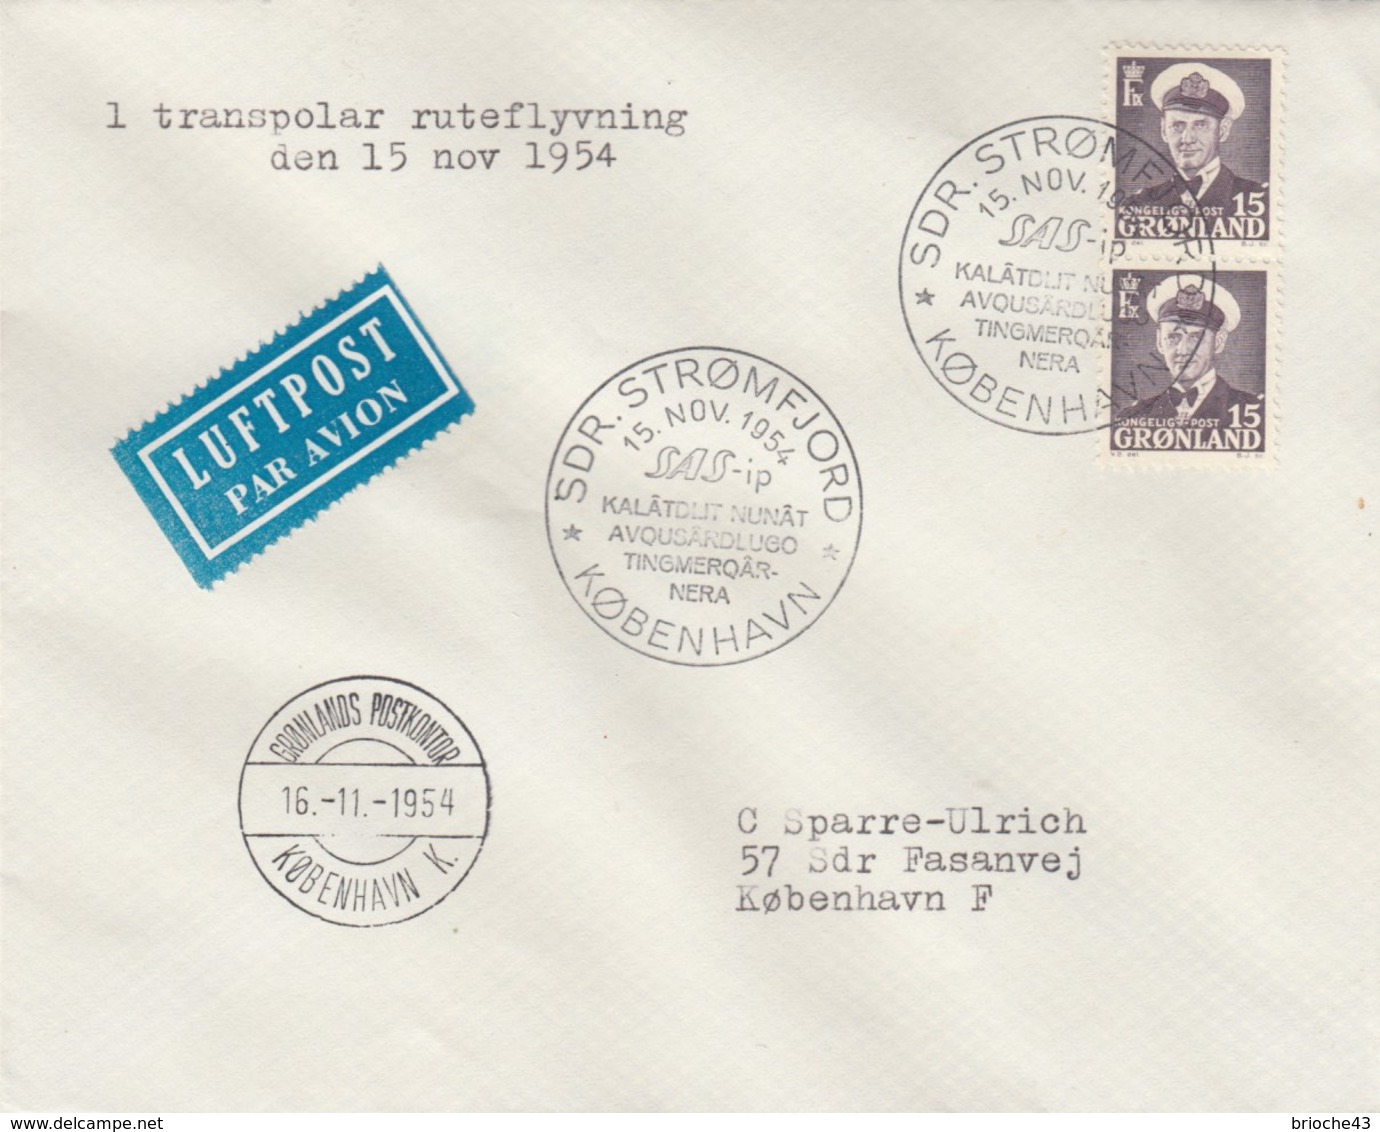 GROENLAND - GRONLAND - COVER SDR. STROMFJORD 15.11.1954  / 4 - Covers & Documents